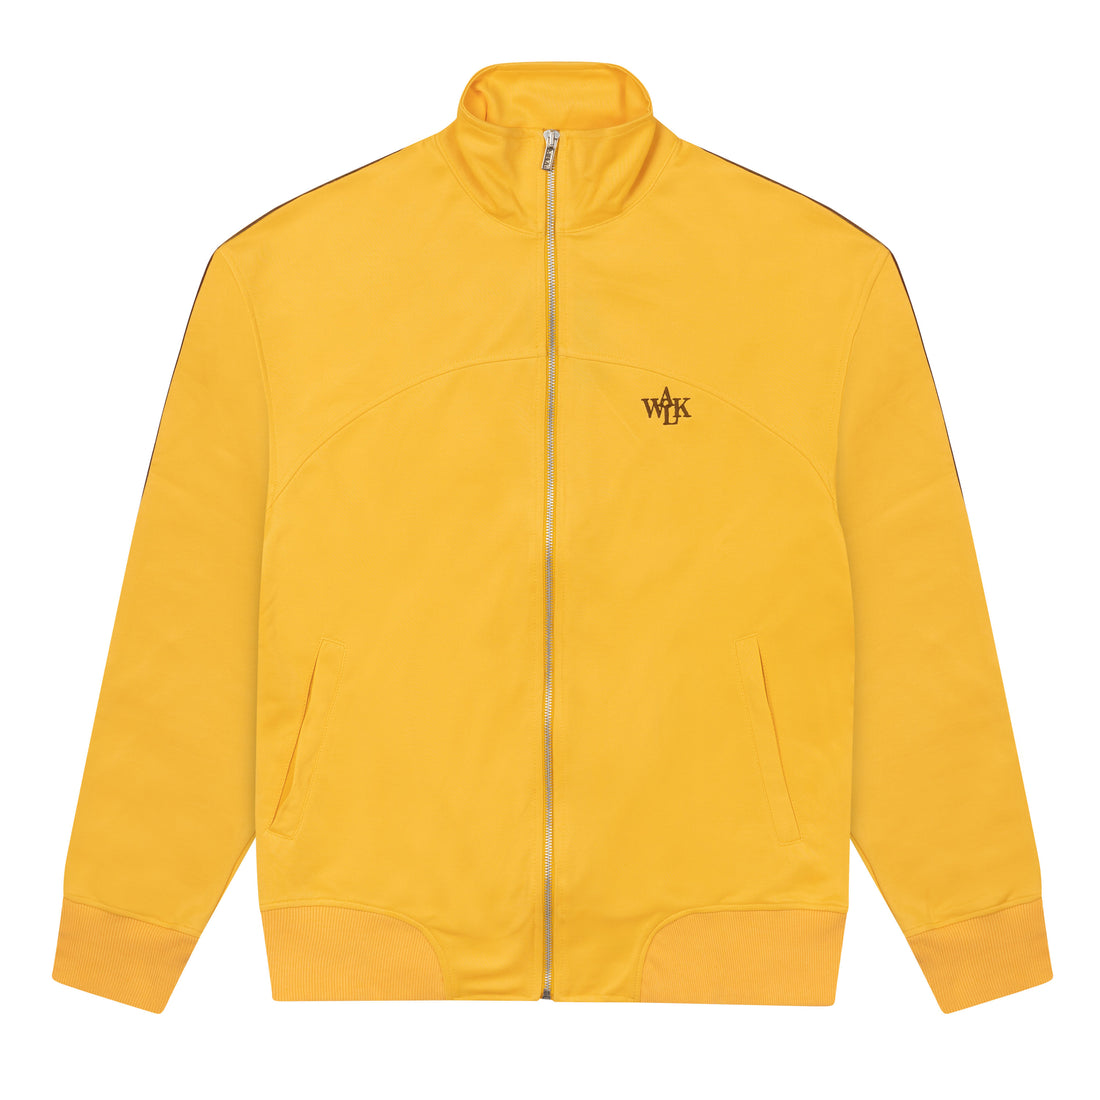 THE YELLOW JOGGING JACKET